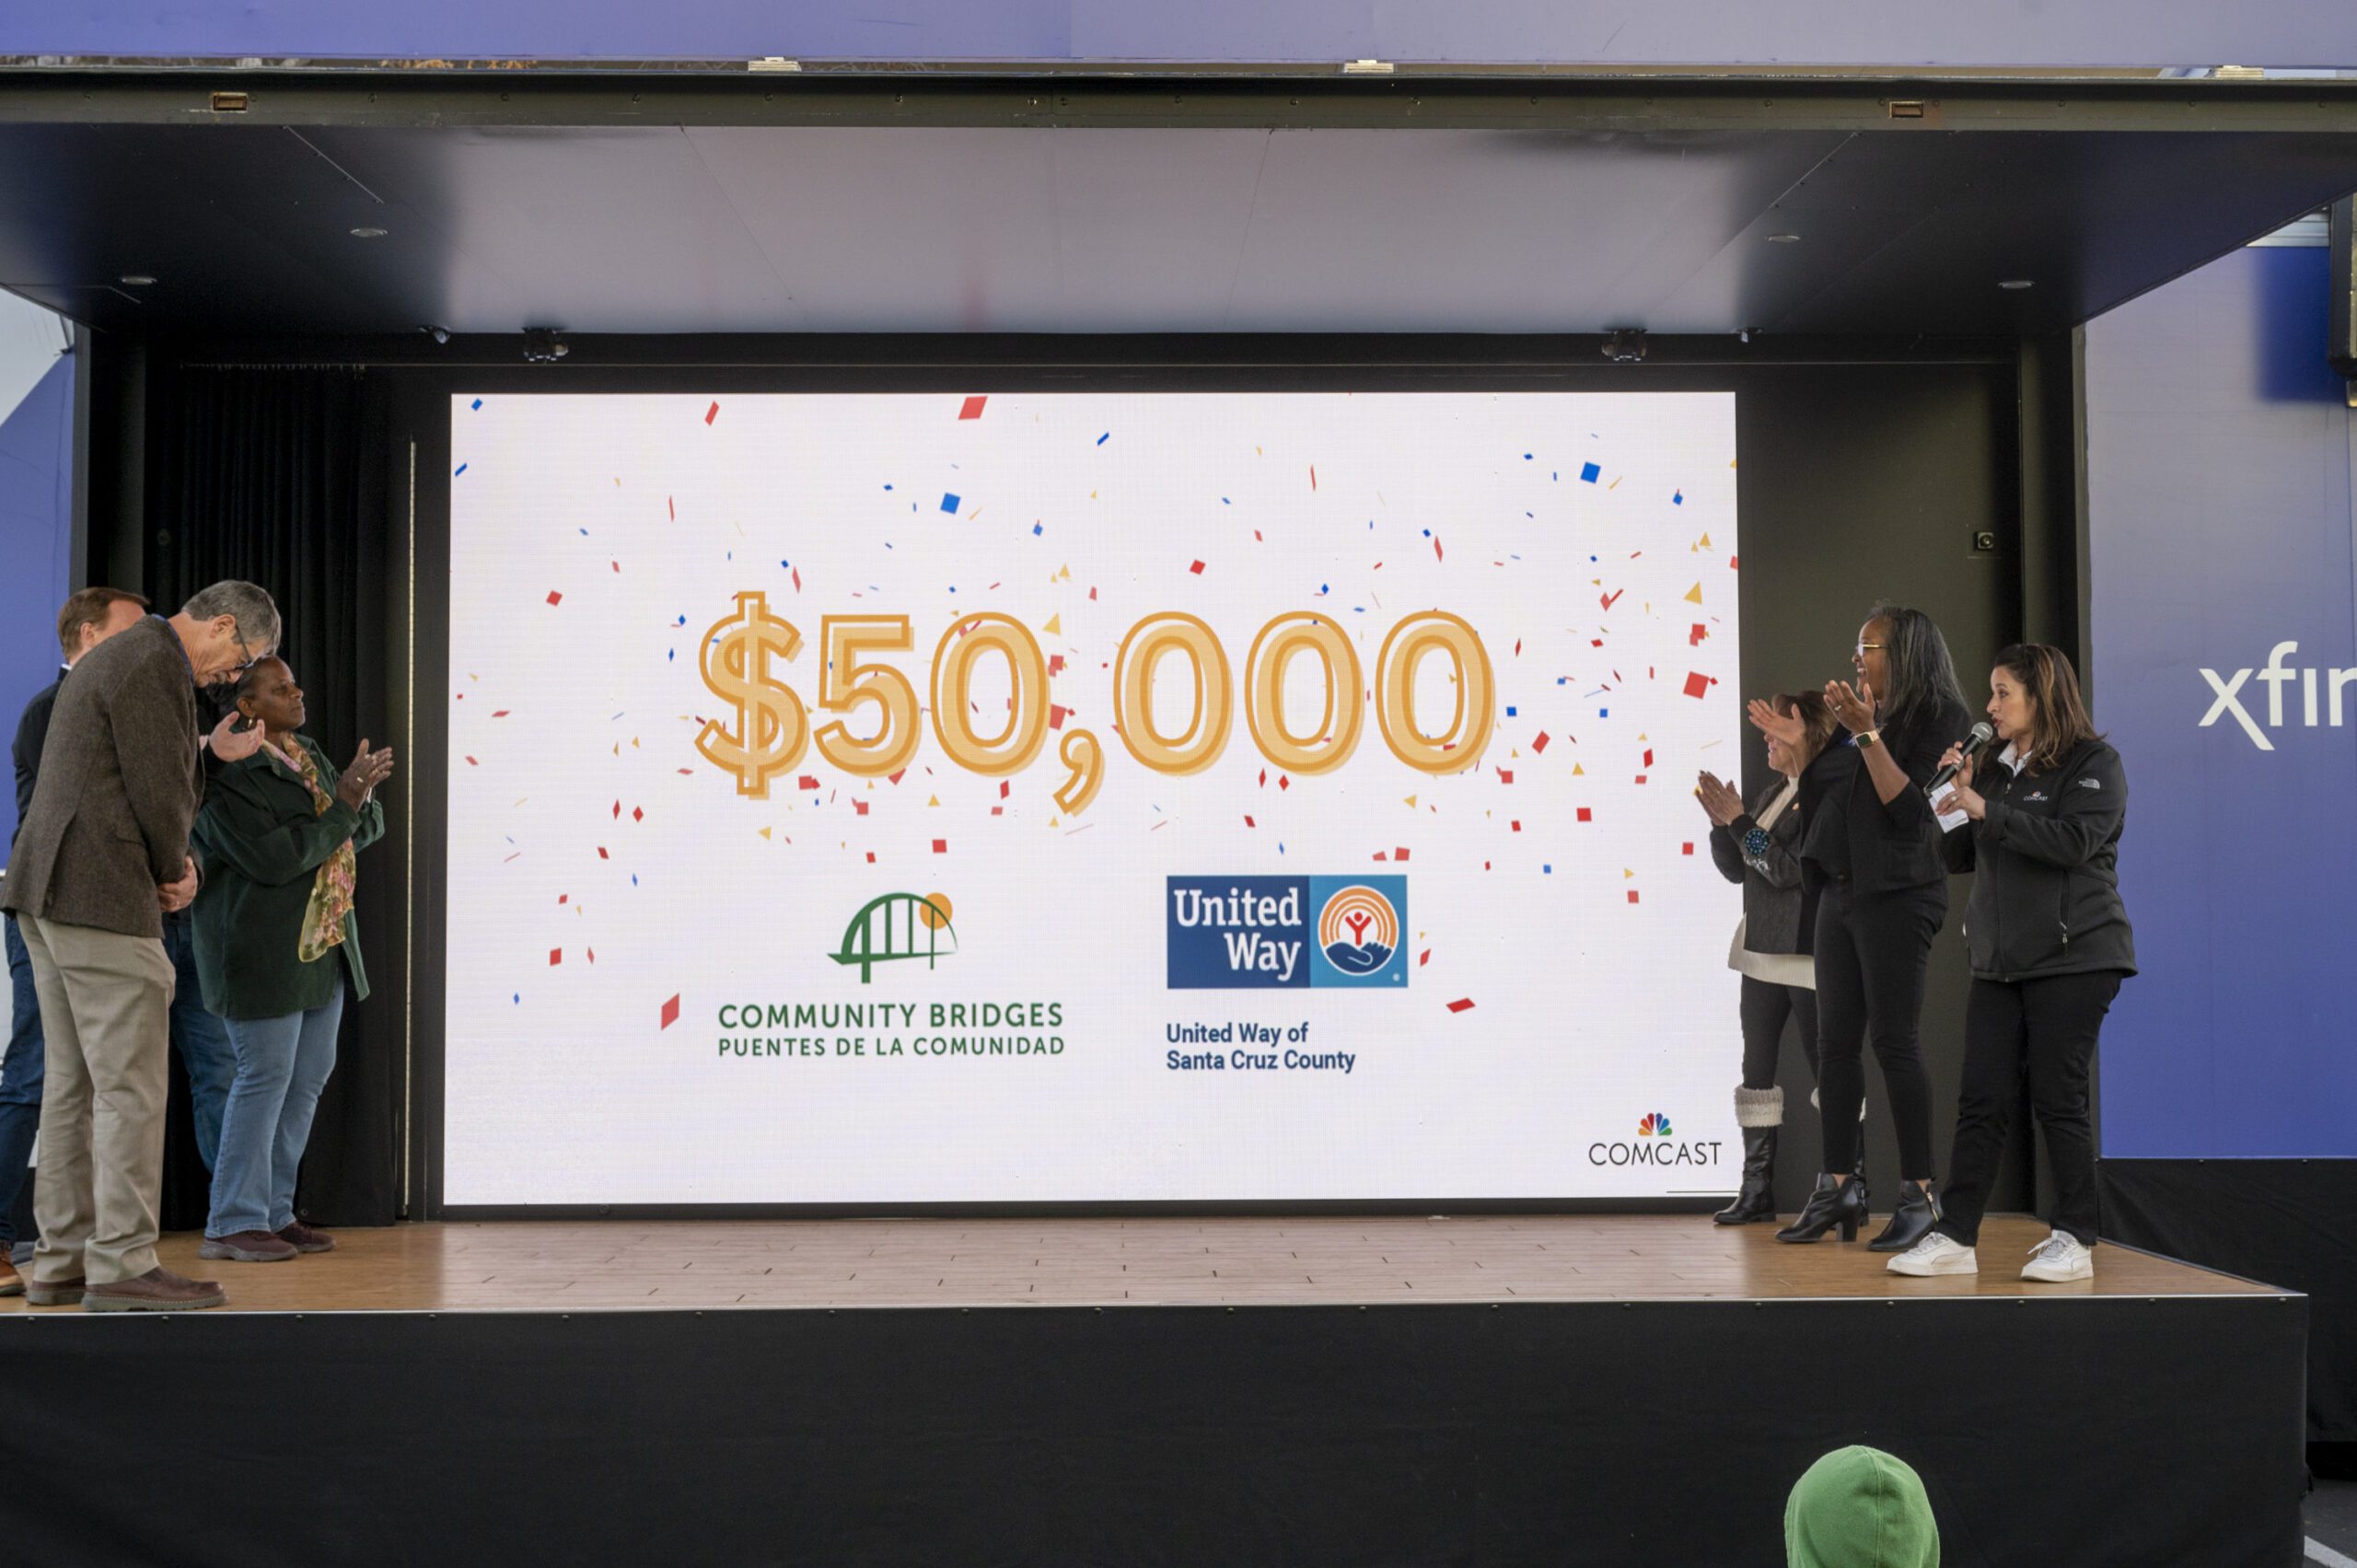 Comcast Hosts Community Event in Santa Cruz & Makes $50,000 Donation for Storm Recovery